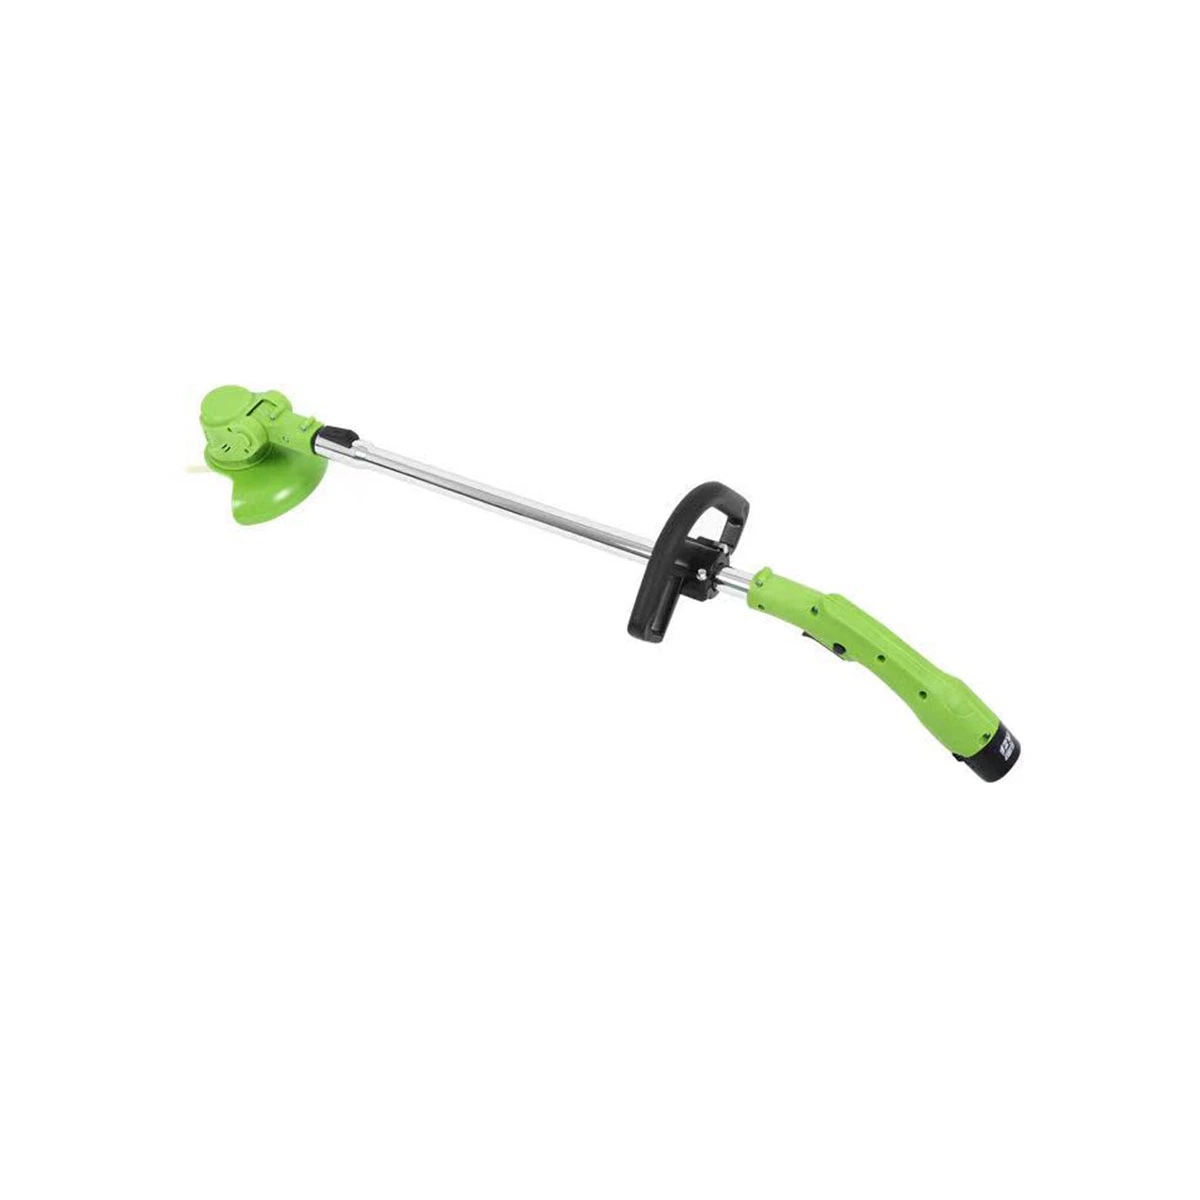 12V Li-ion Battery Powered Rechargeable Grass Trimmer, Electric Brush Cutter Grass Cutter Machine for Home Use